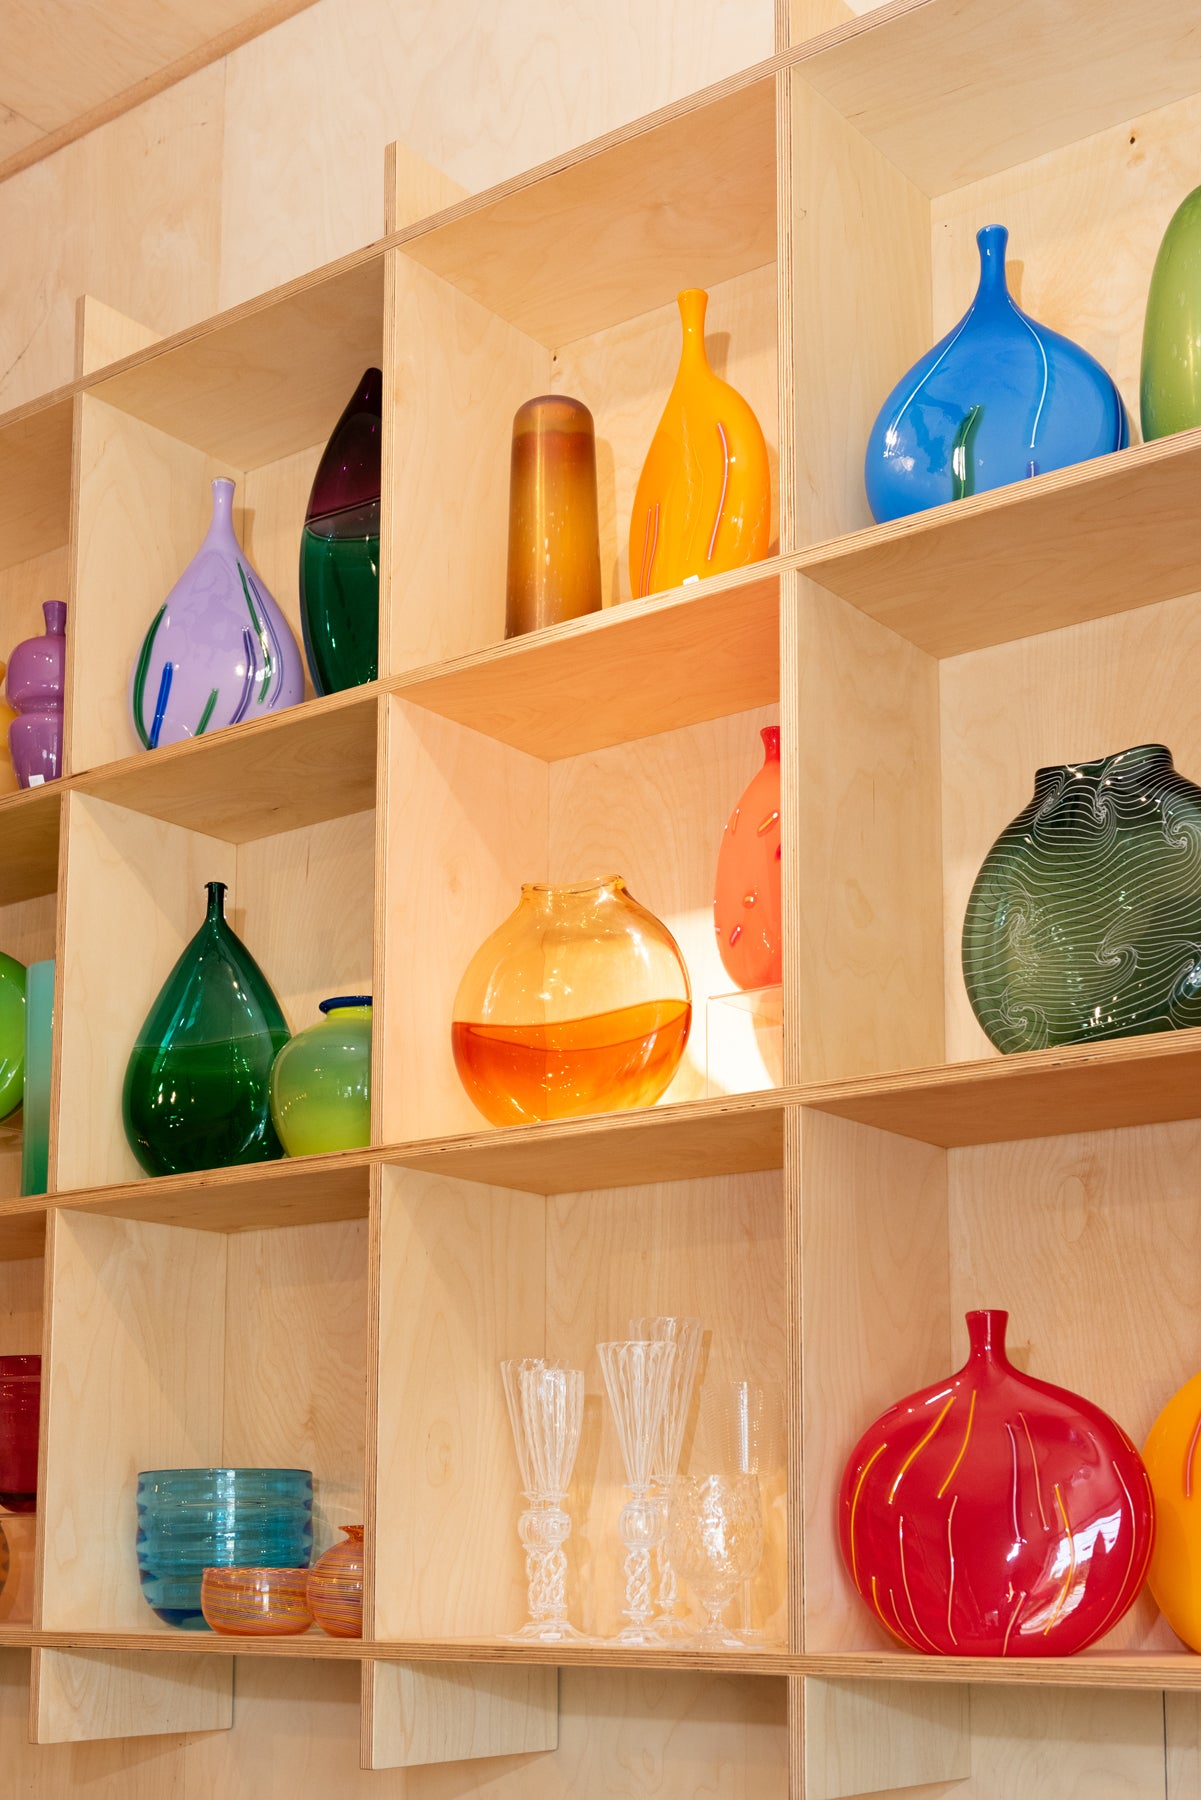 A gallery view of a grid wall in the Small Batch Glass gallery where varied hand blown shapes sit. Image by Loam